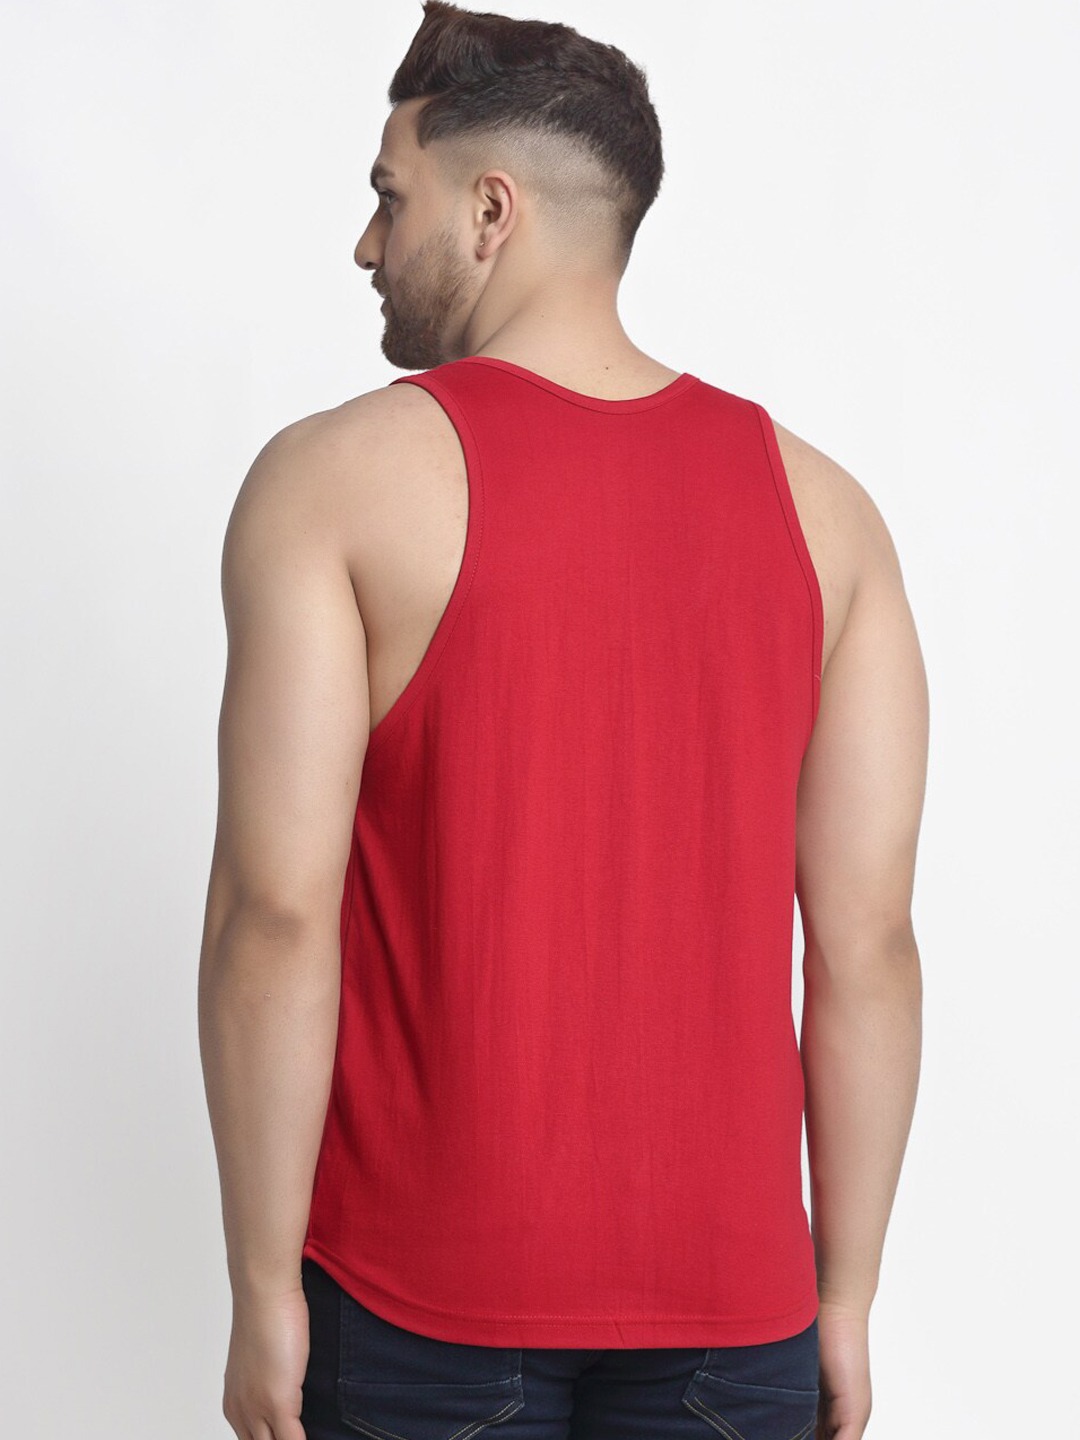 Clothing Innerwear Vests | Friskers Men Pack Of 2 Solid Pure Cotton Gym Vests - IU59342